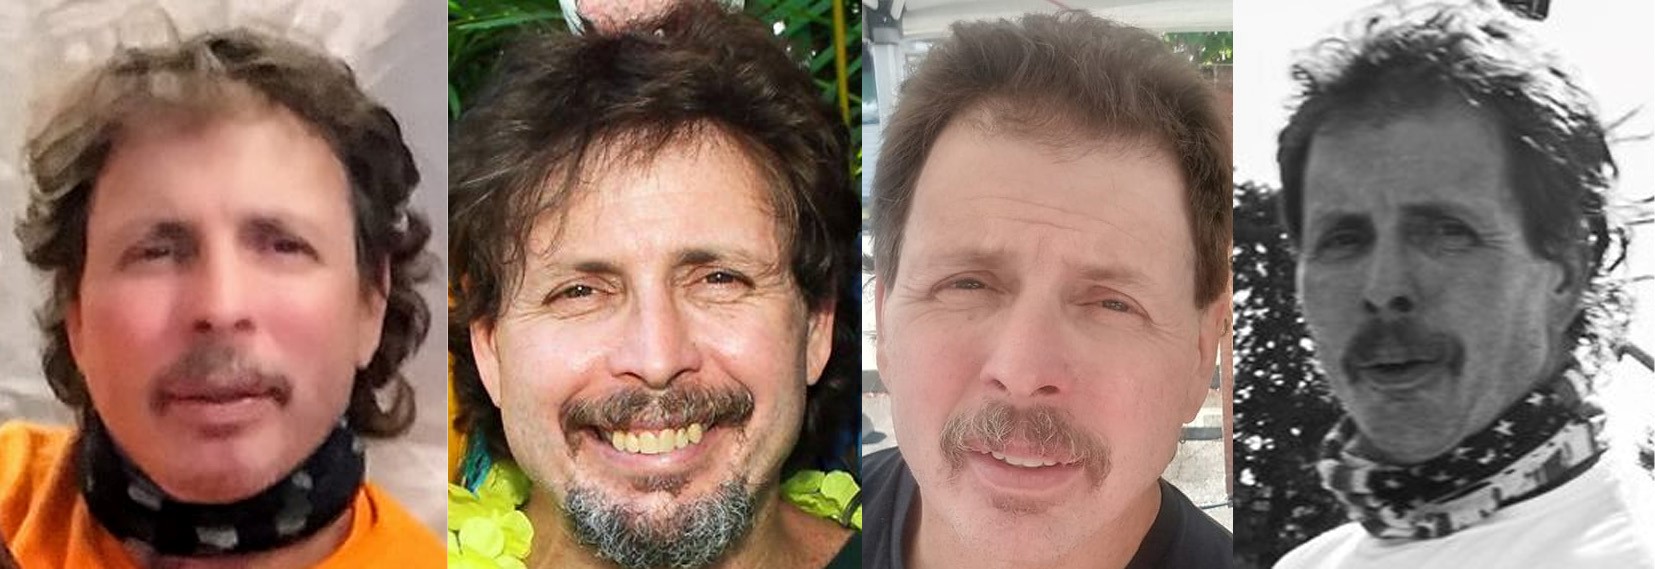 4 photos show Scott Gourley. He is a white man with curly grey and brown hair often cut short, a grey mustache that goes down the sides of his mouth, and thin grey eyebrows. 